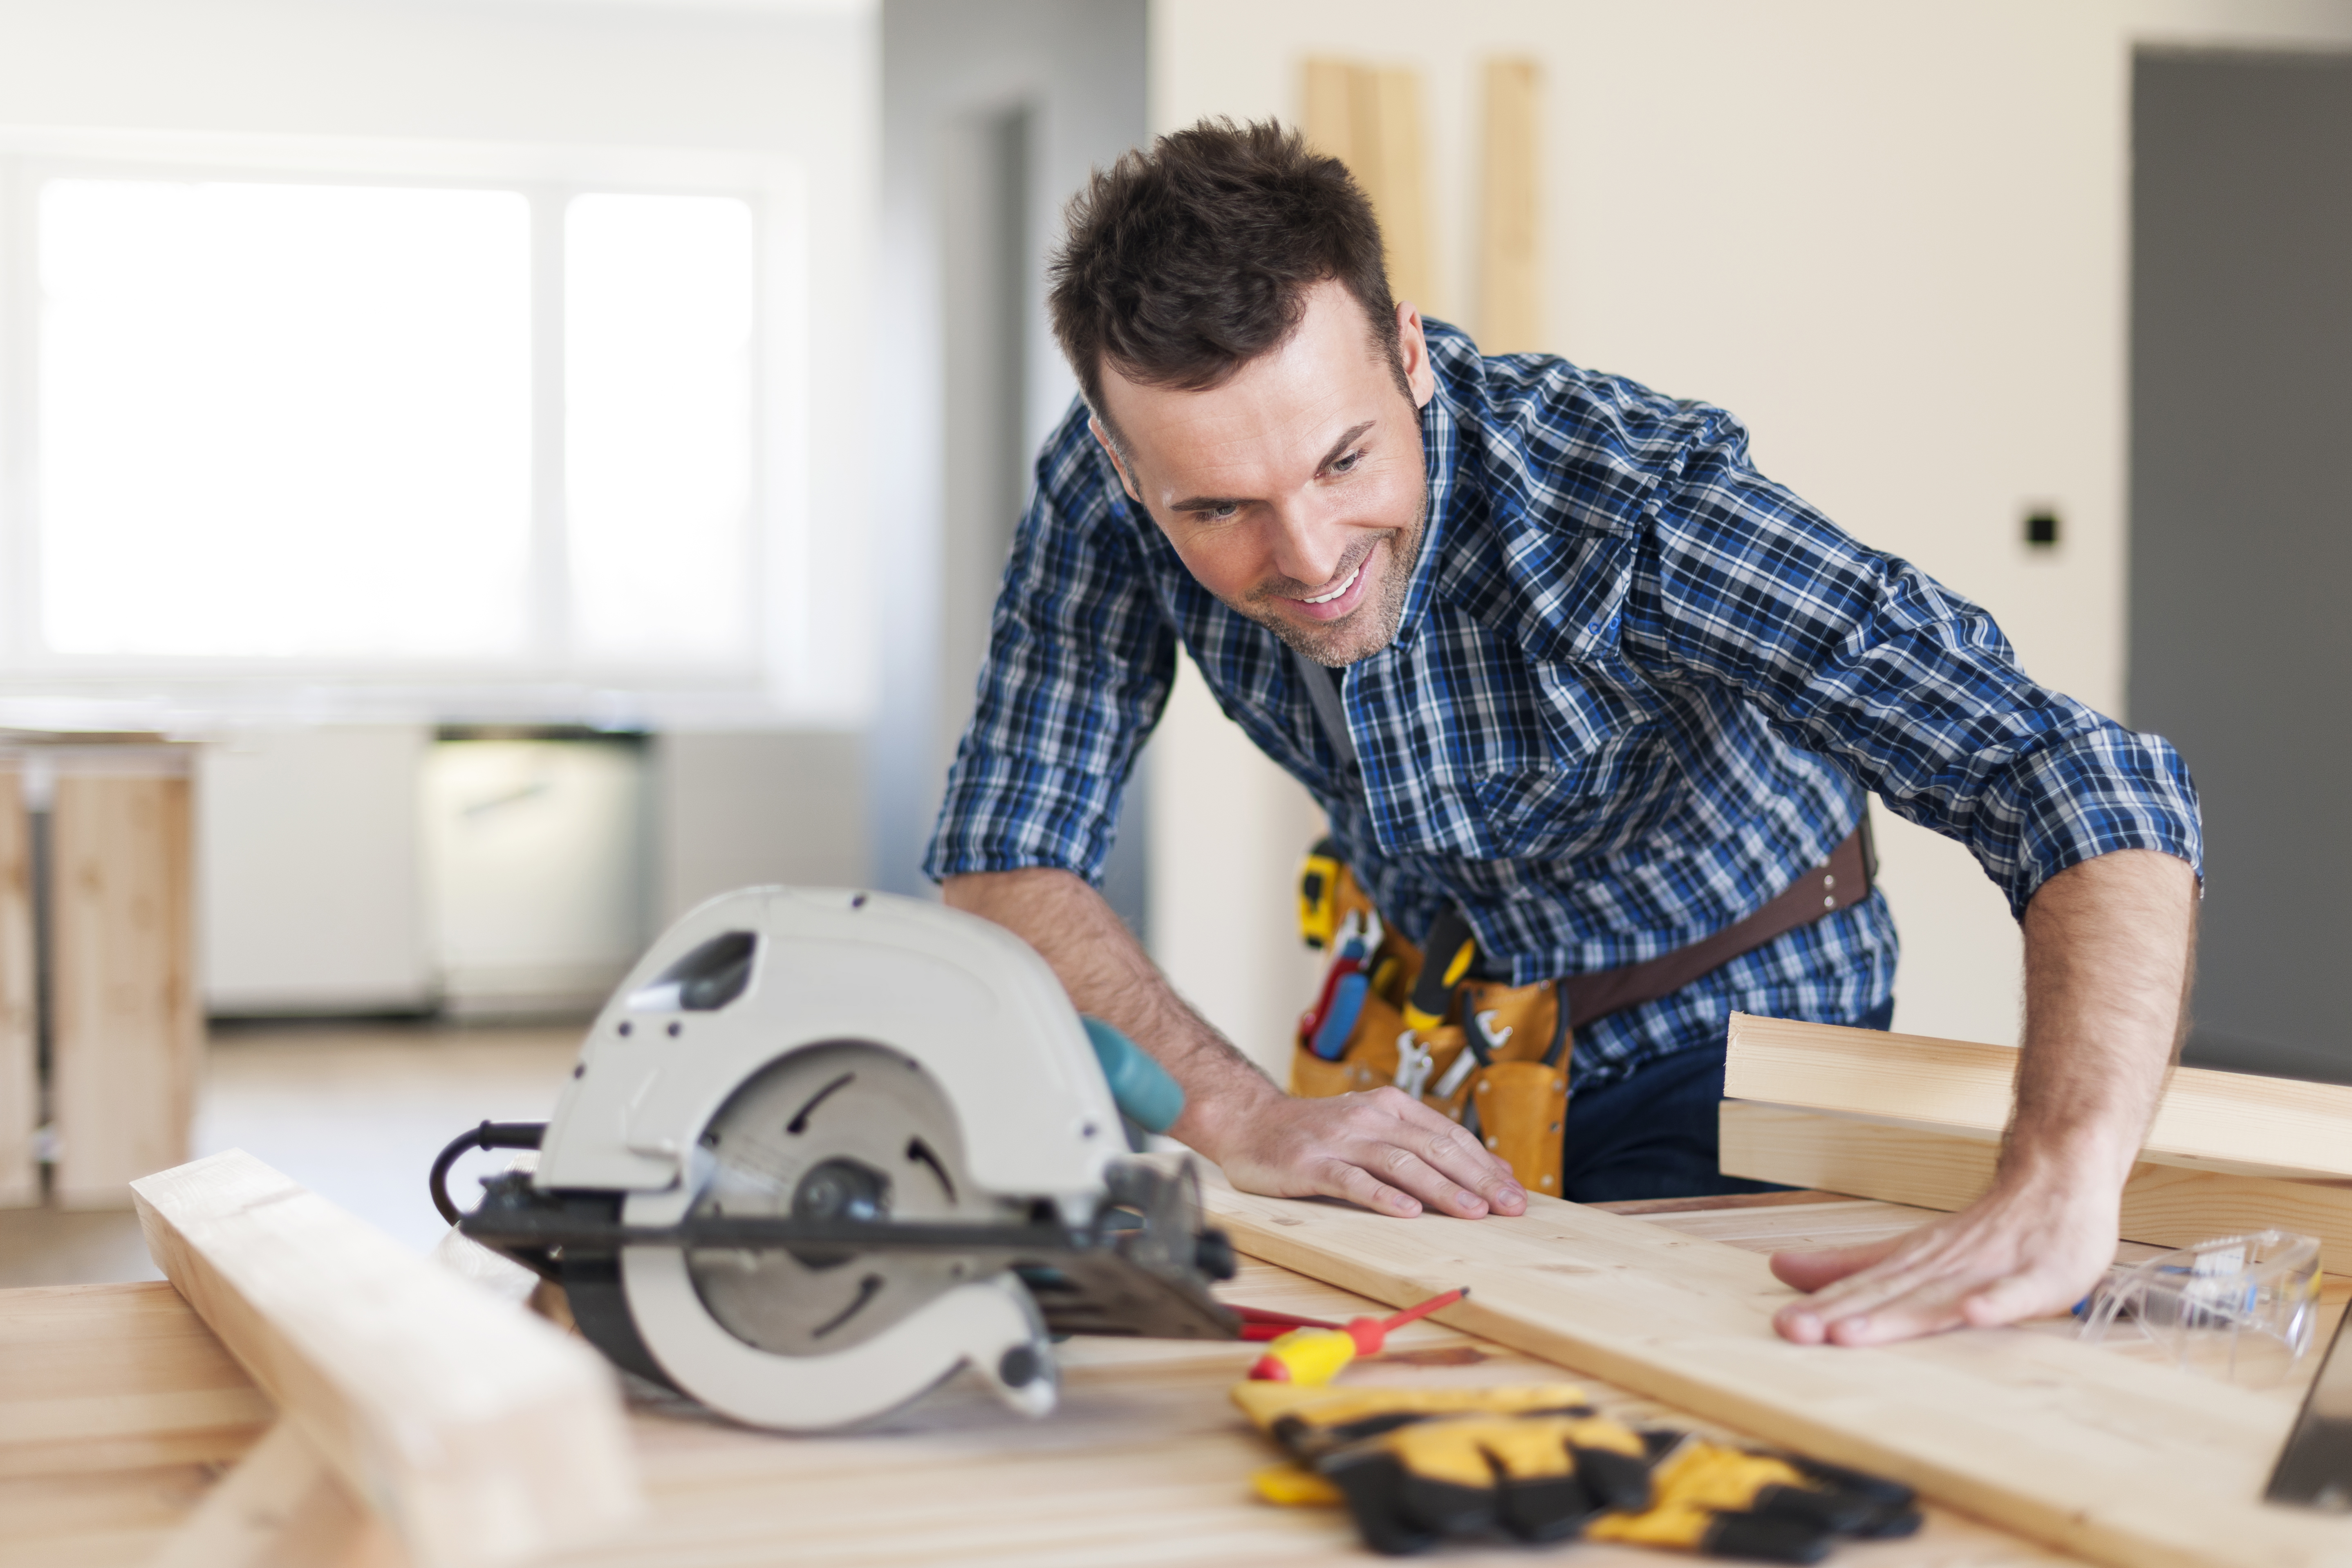 Which home improvement stores offer the best warranty options?